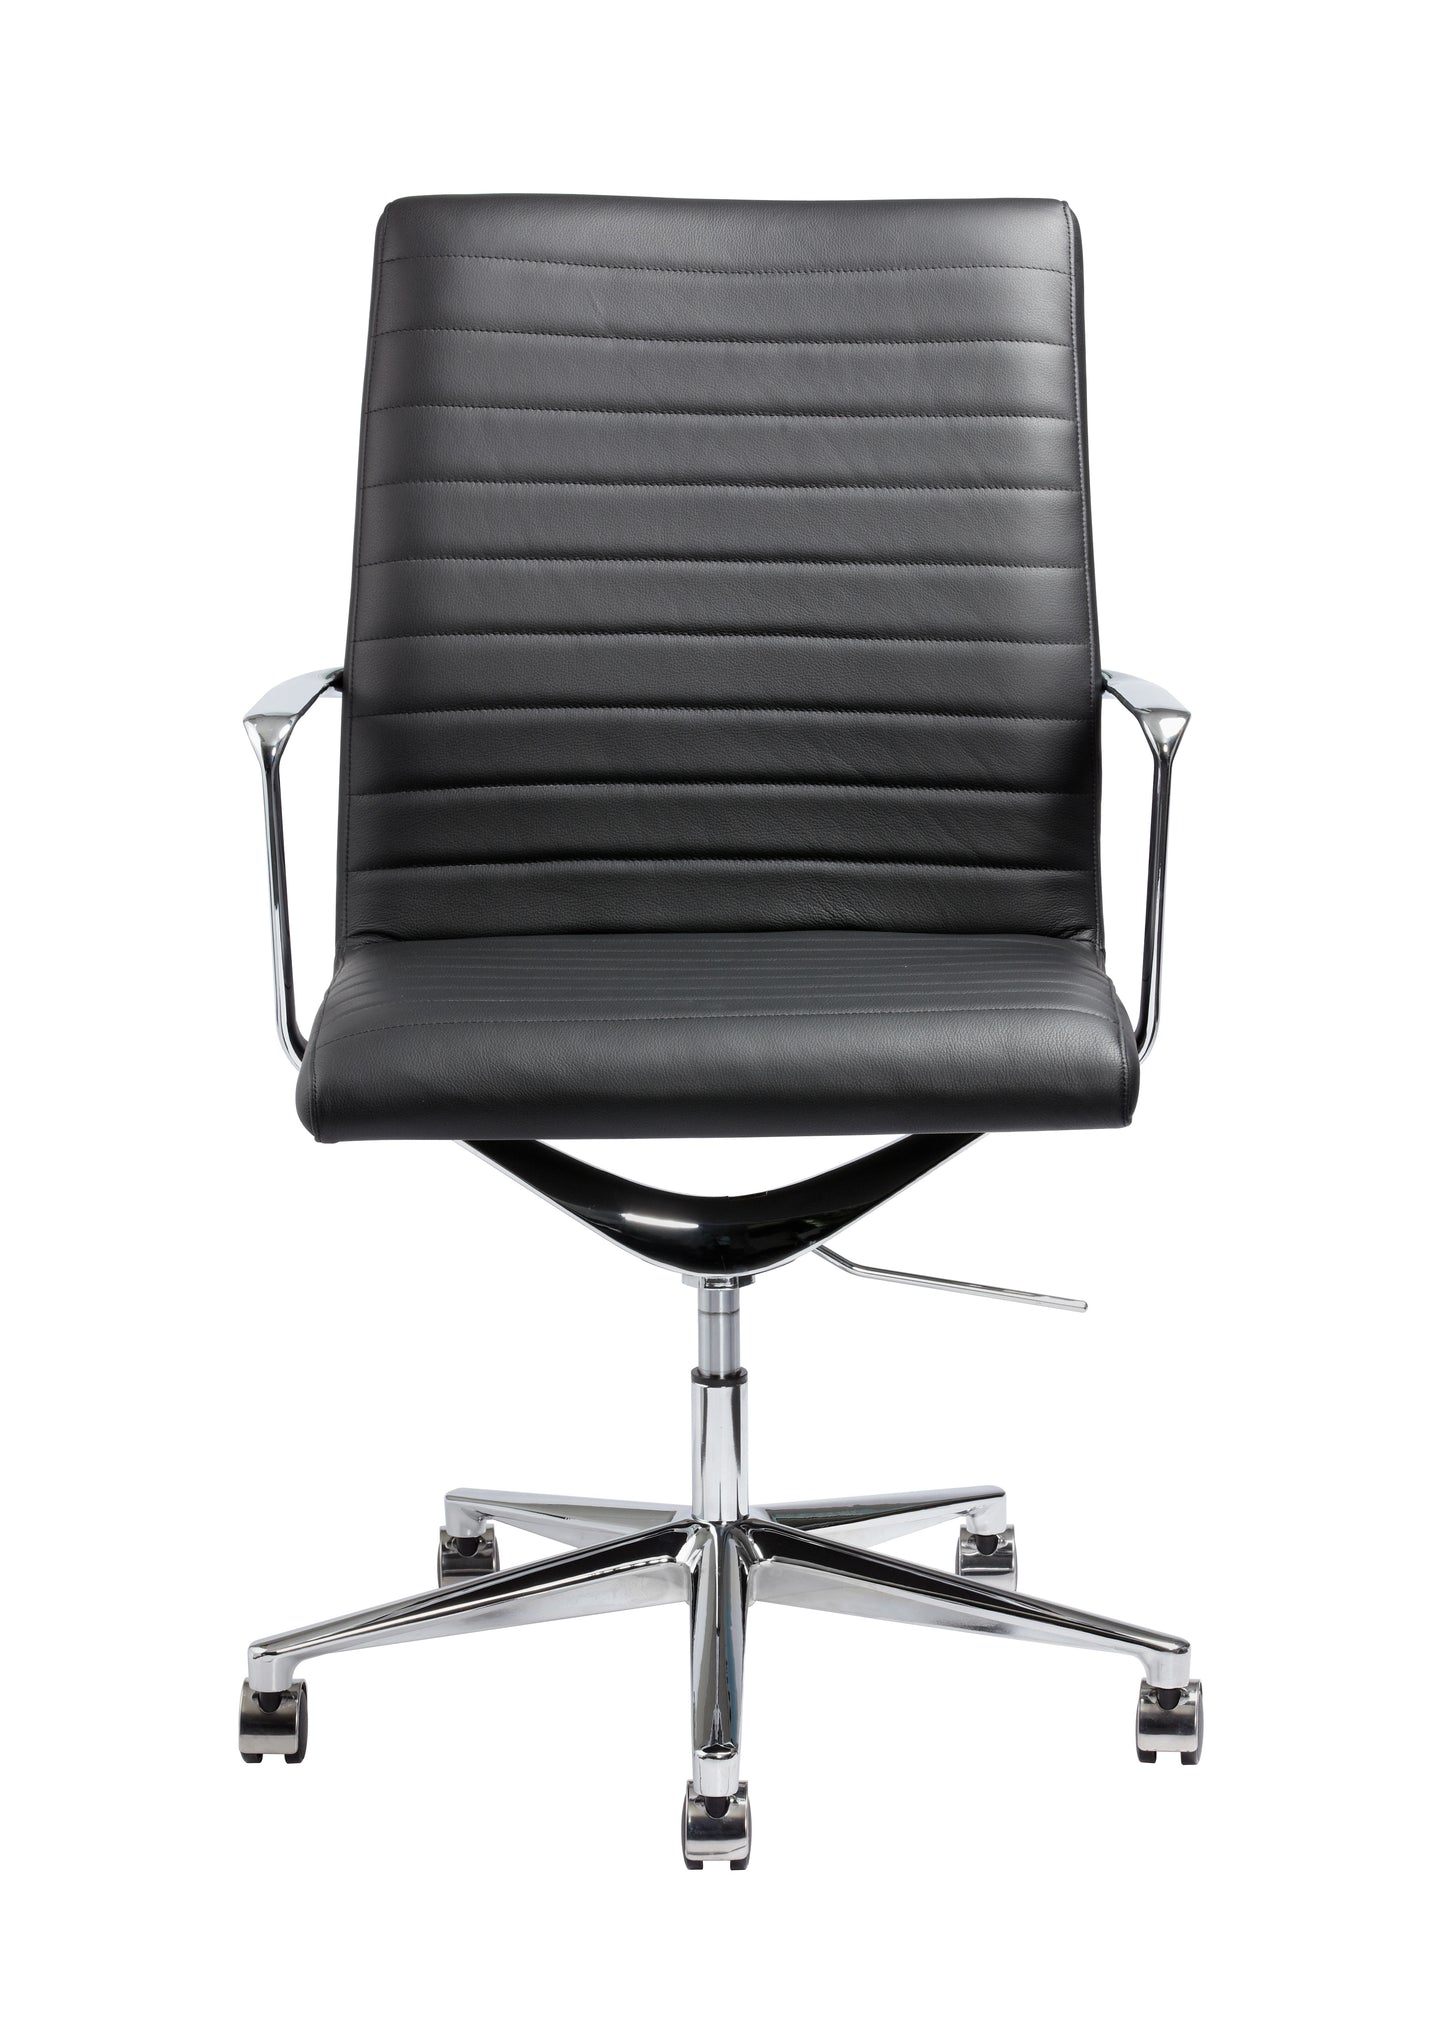 Amalfi Mid-Back Conference Chair